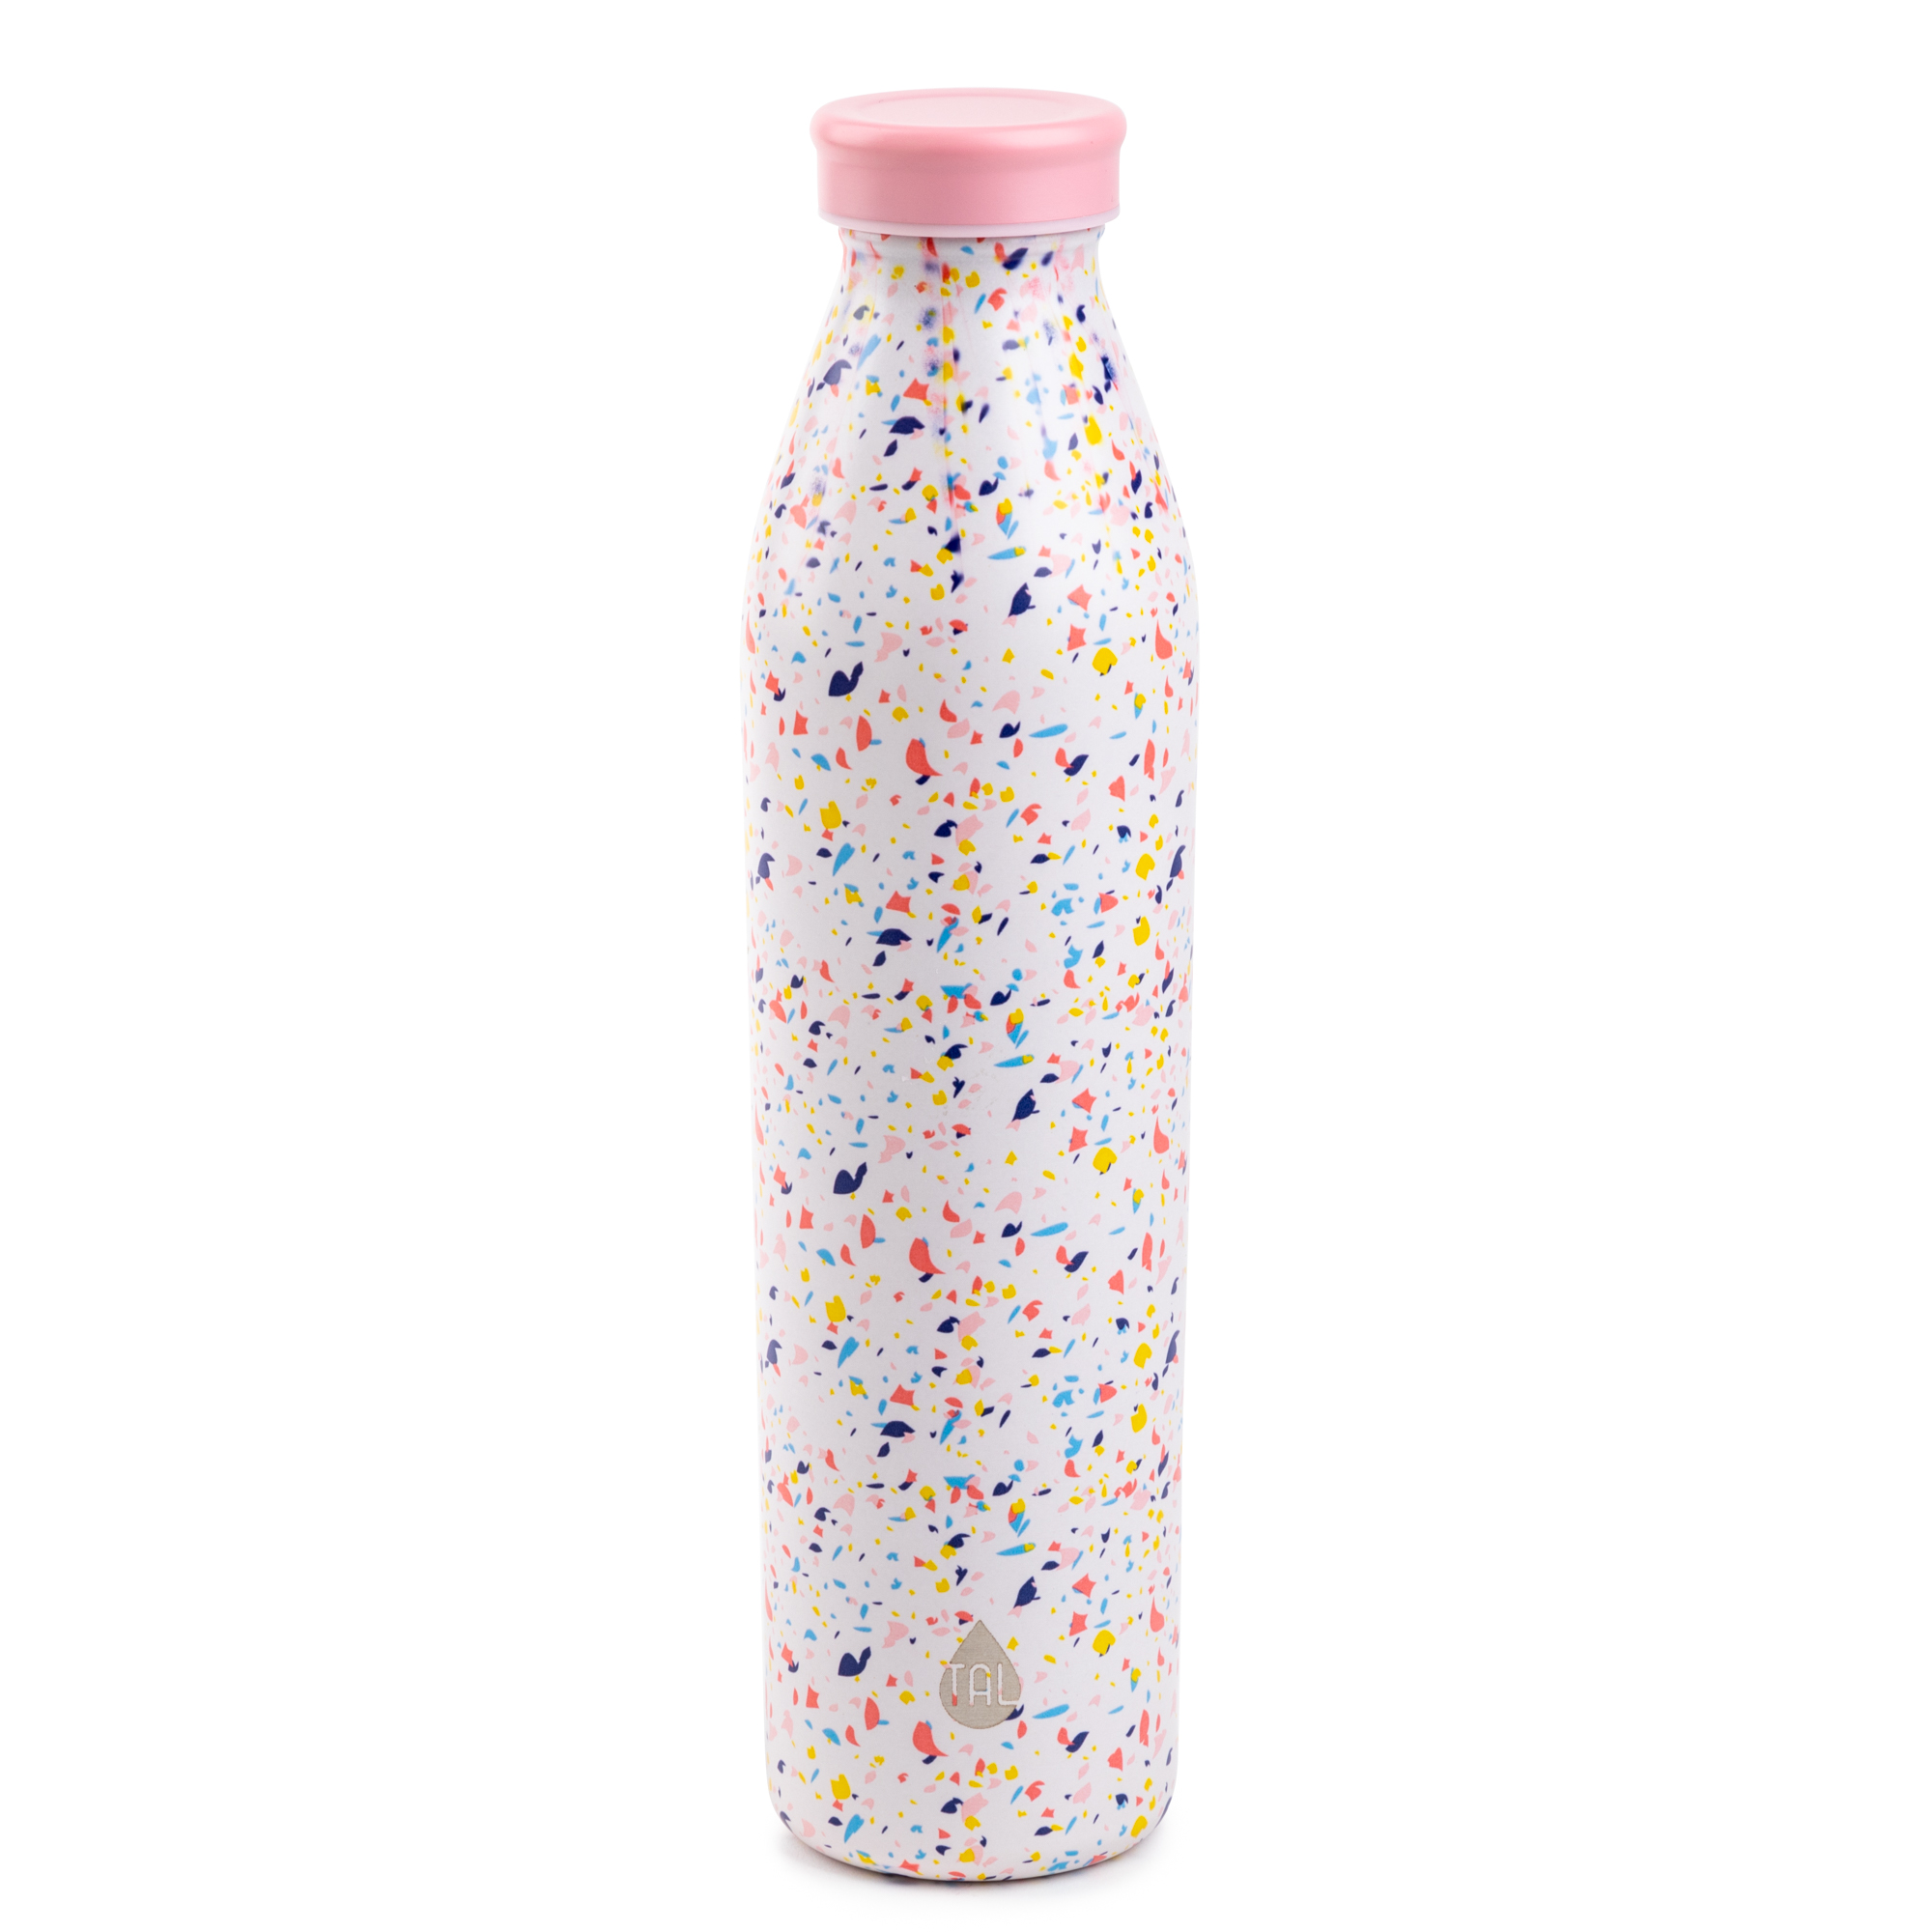 TAL Stainless Steel Water Bottle, 20 fluid ounces, Confetti - image 1 of 5